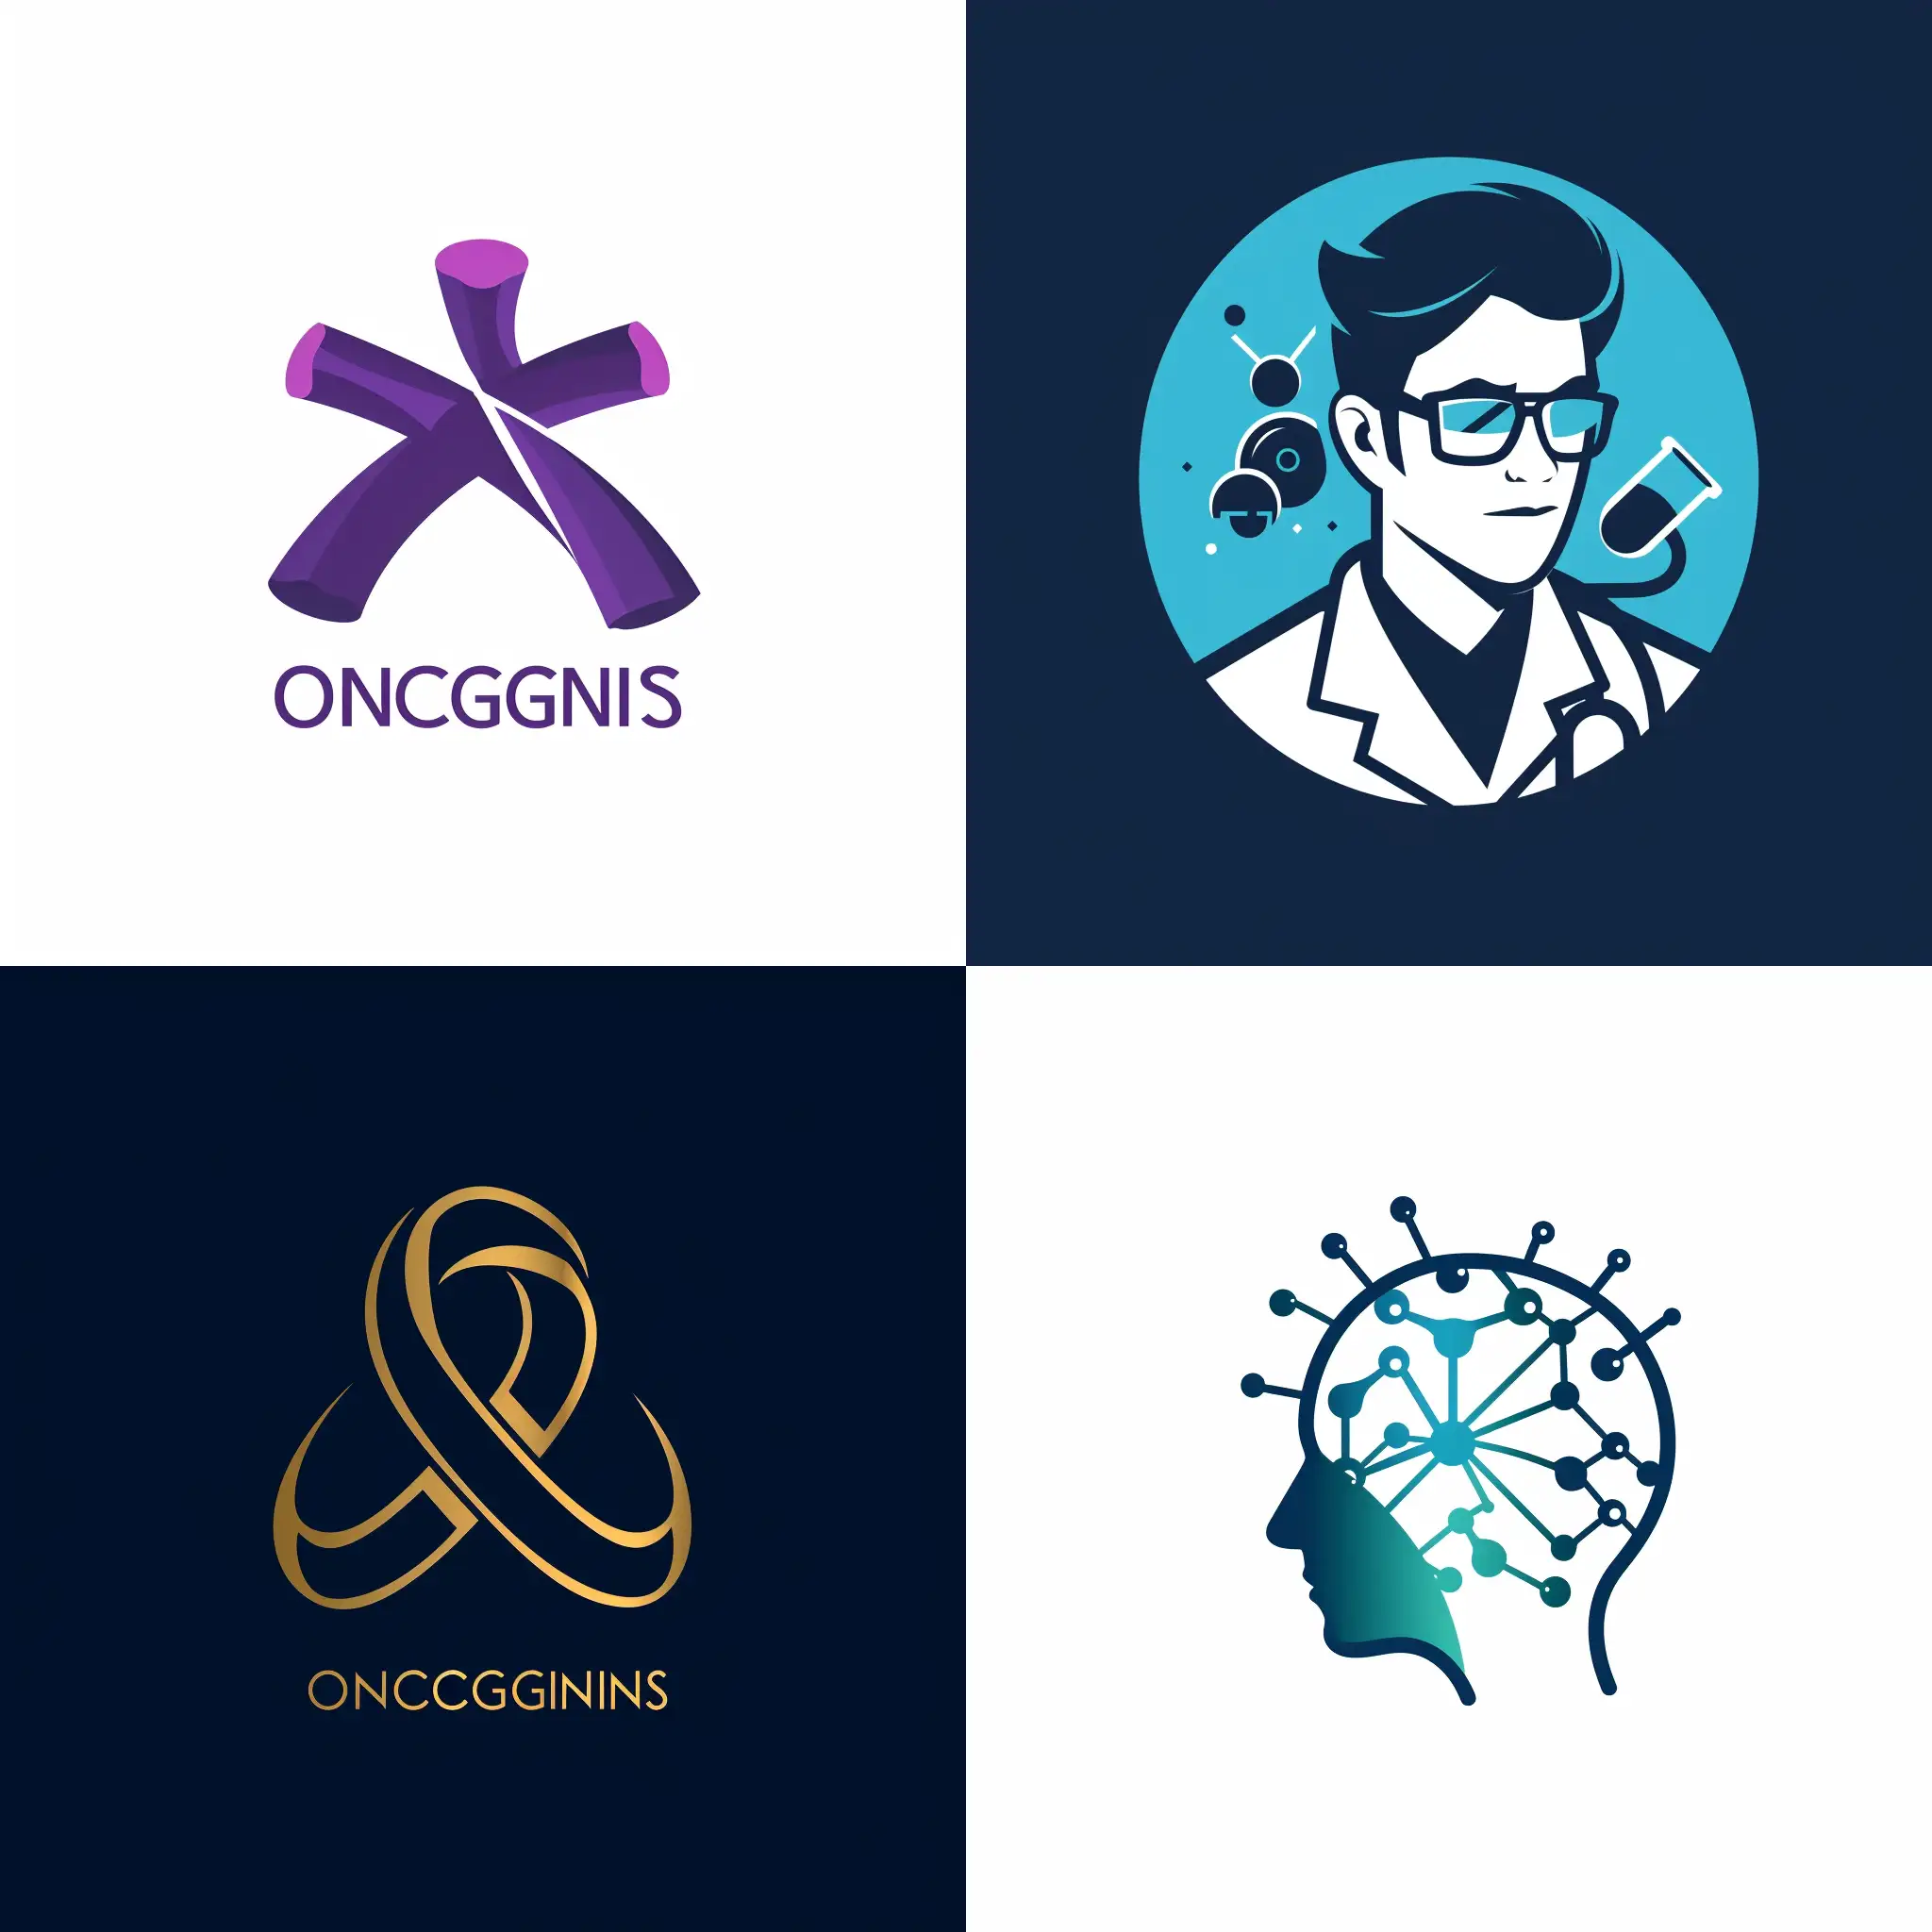 Oncogenius-Research-Team-Logo-Dynamic-Emblem-for-Innovation-and-Collaboration